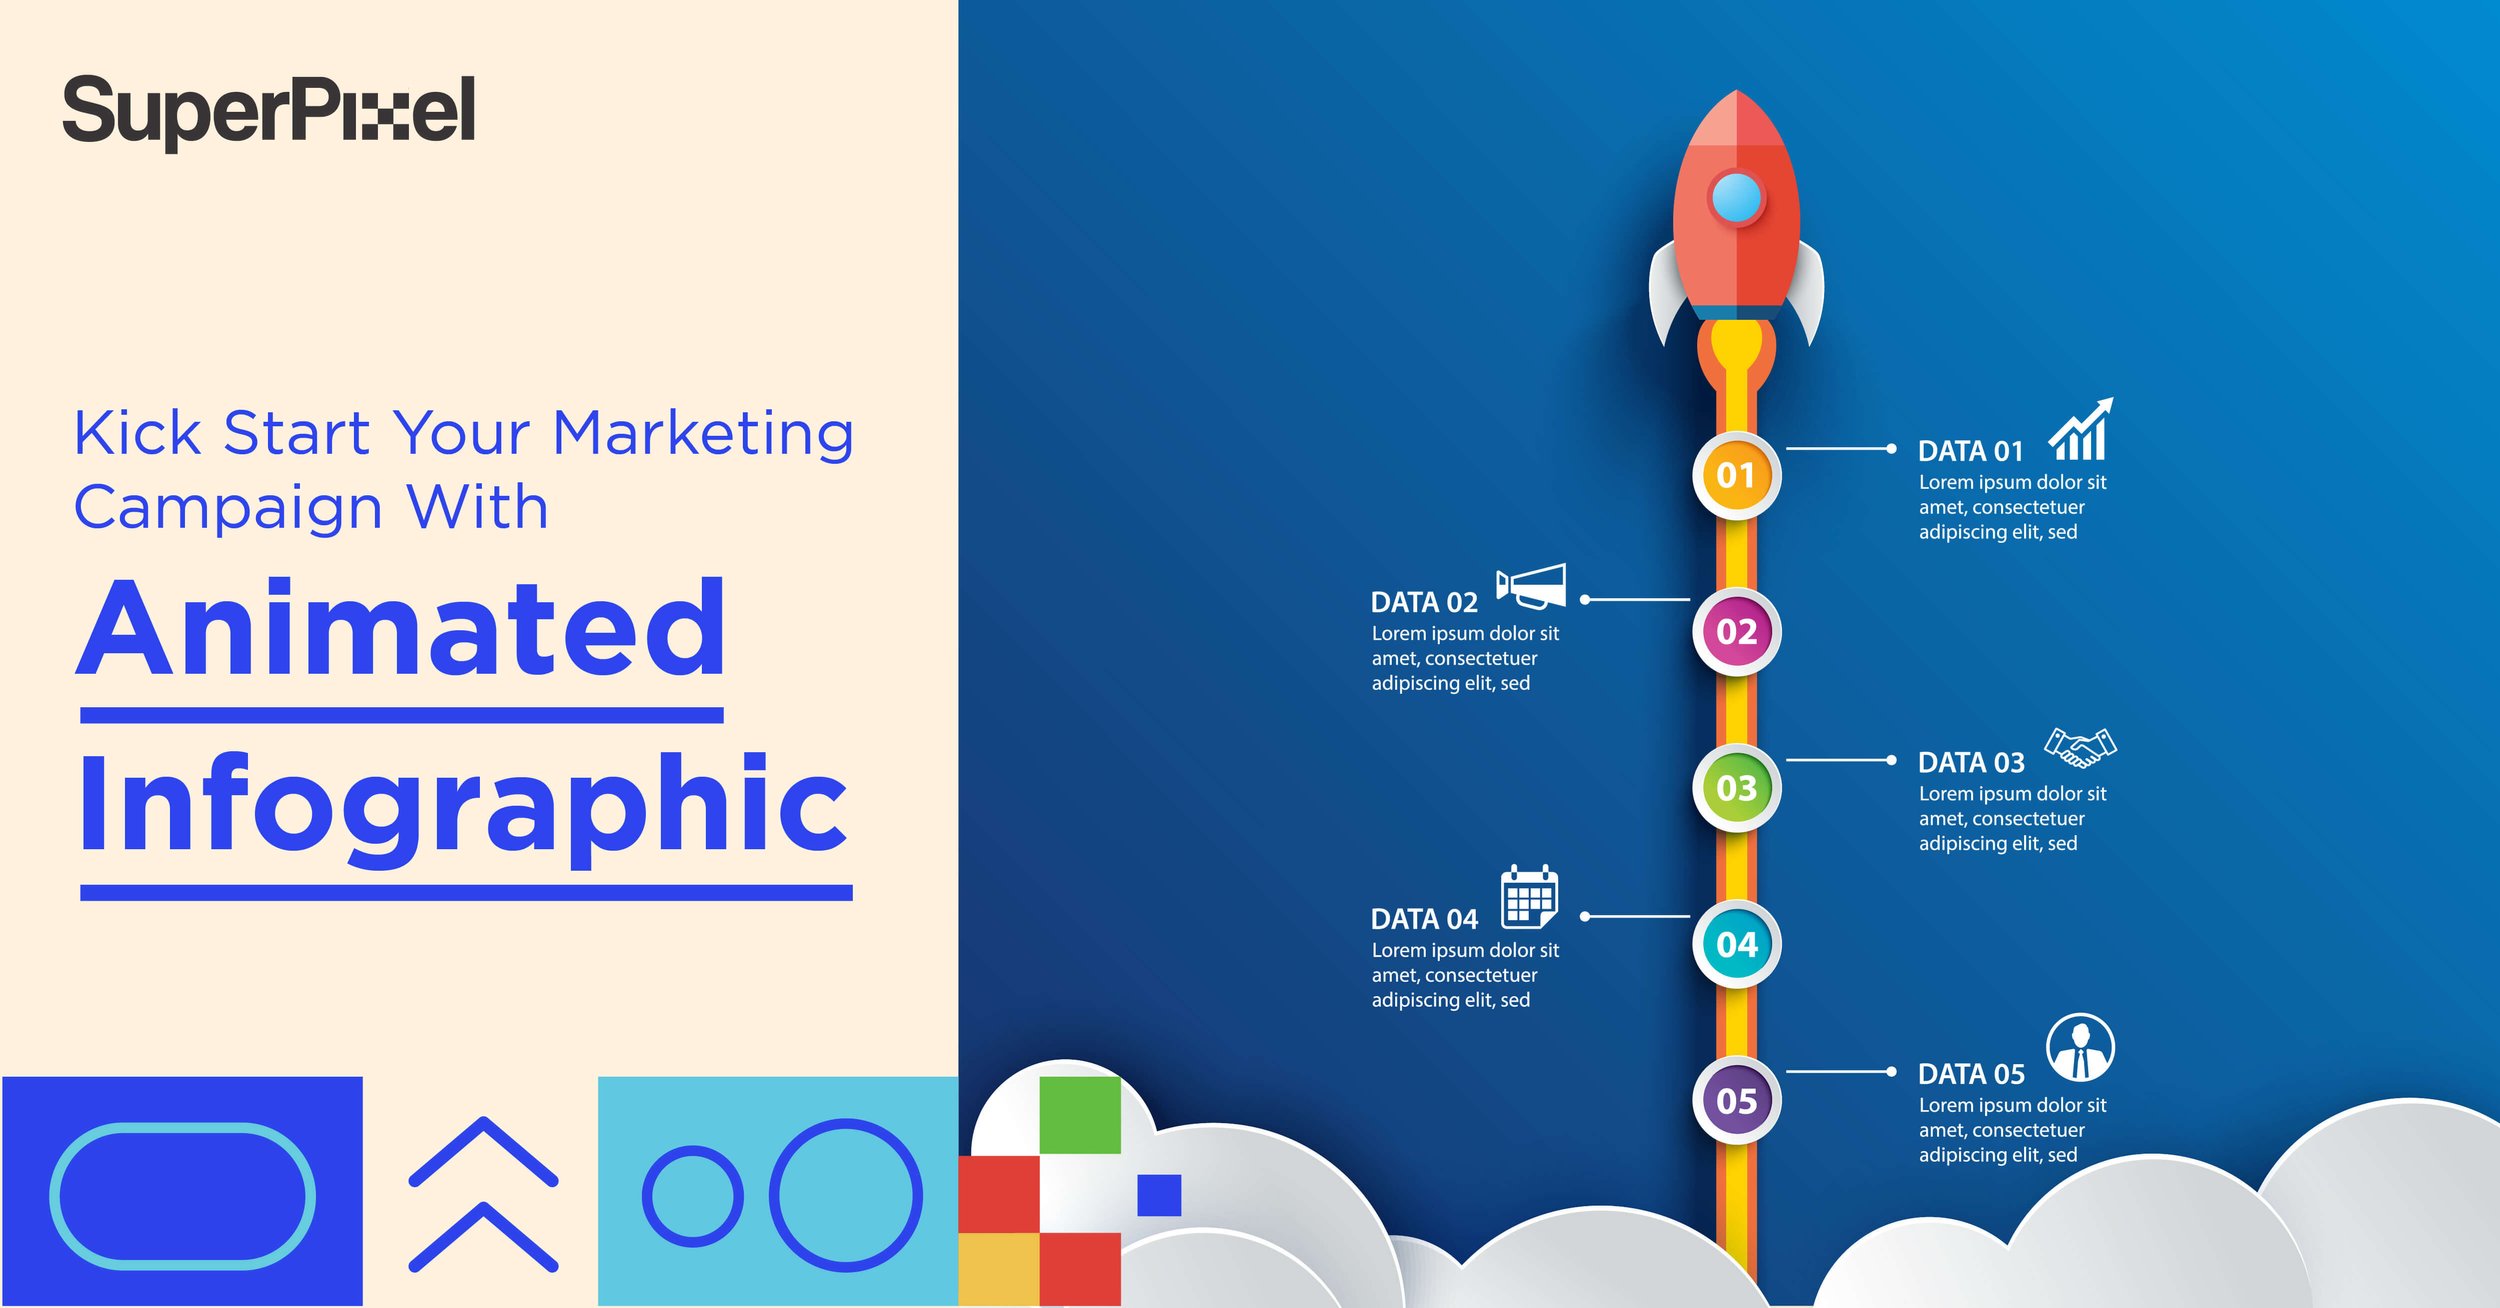 Kick Start Your Marketing Campaign with Animated Infographic